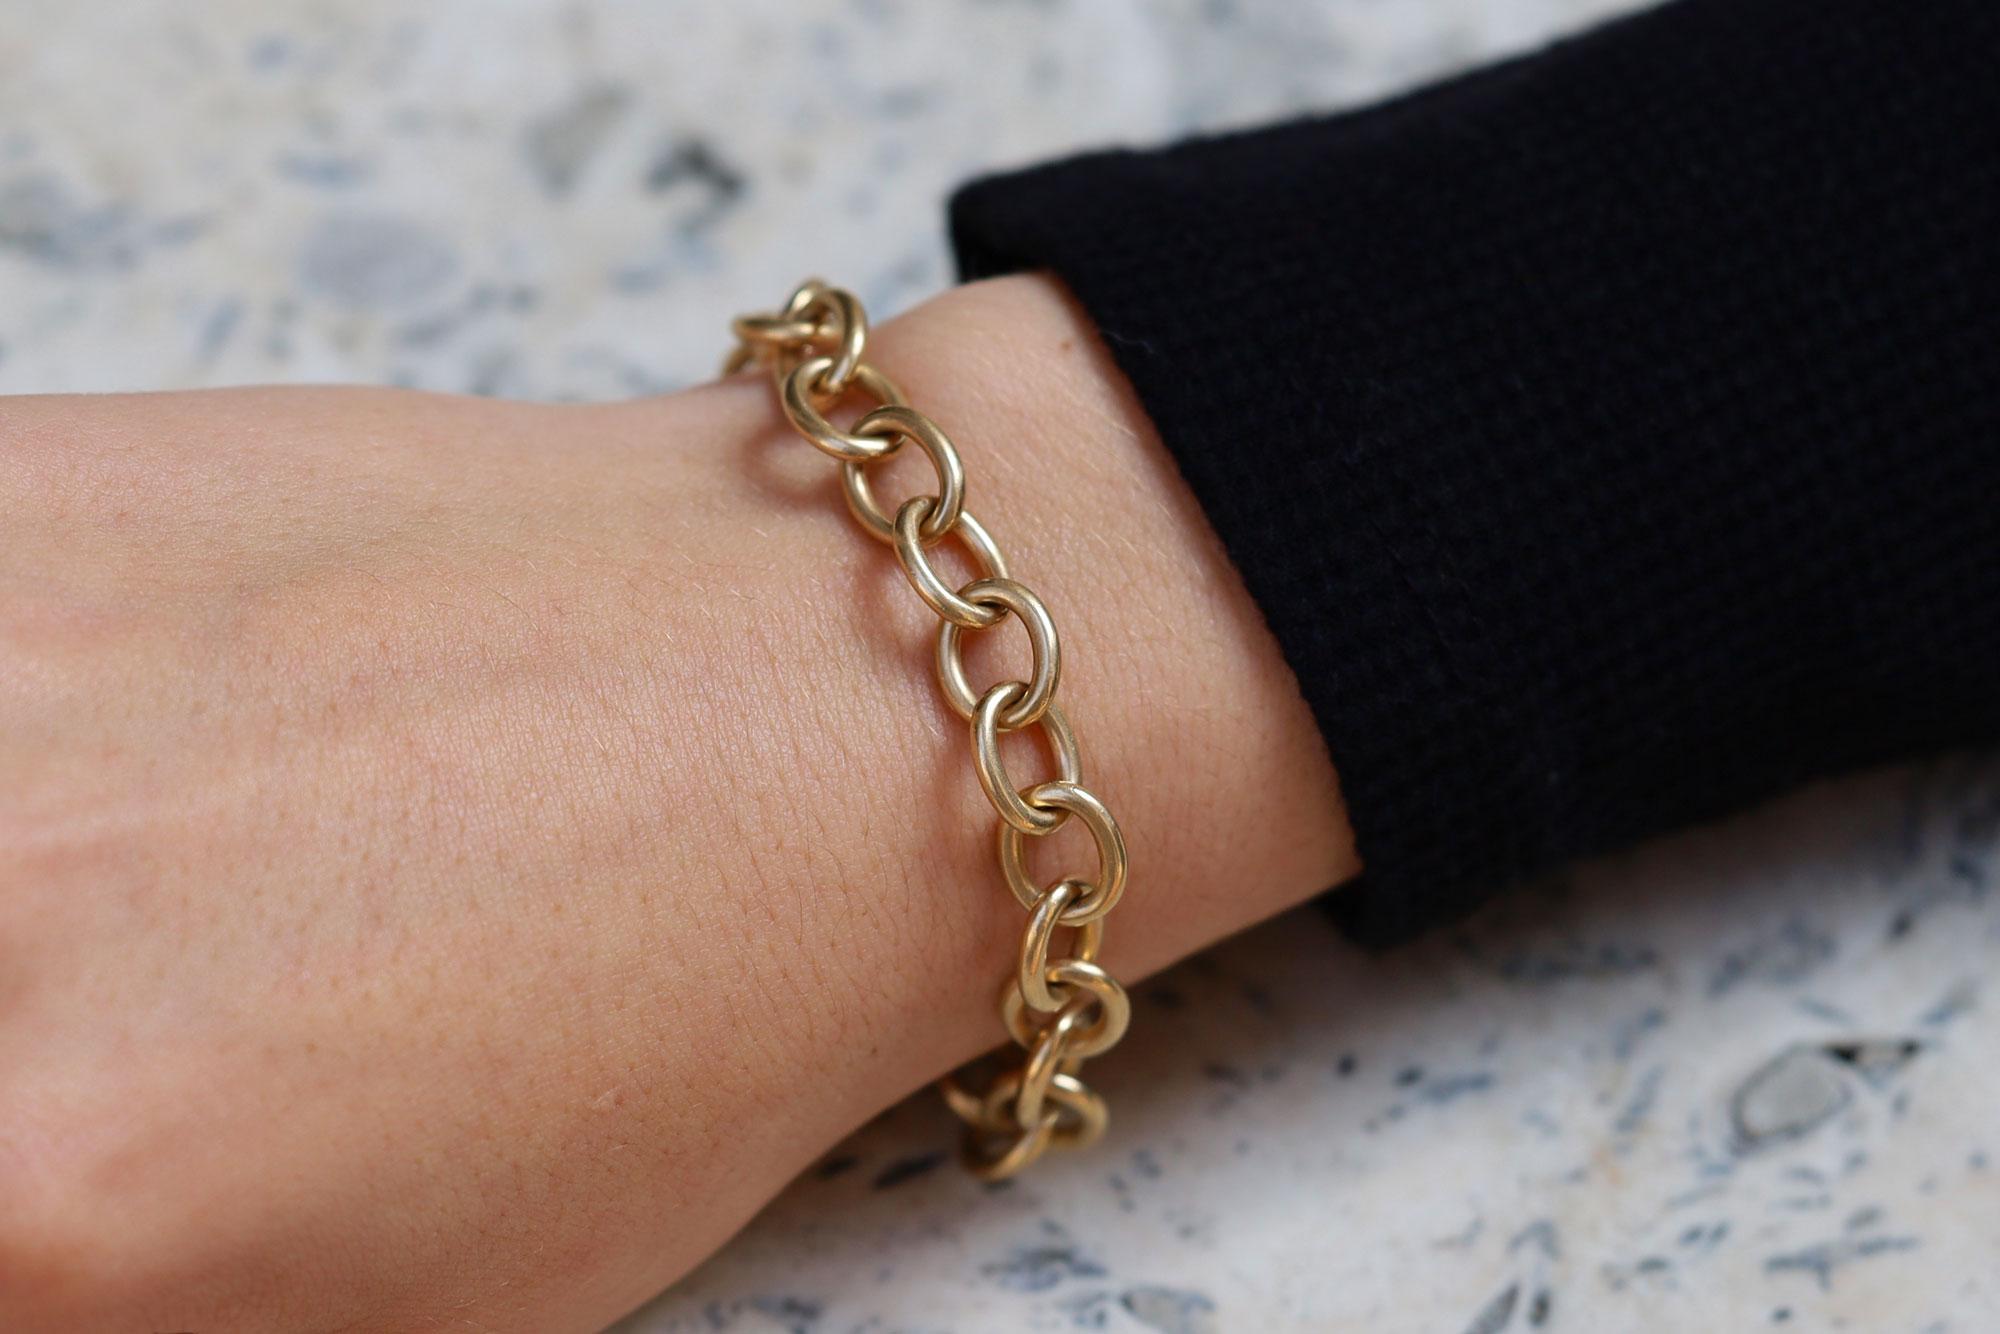 A recent discovery from the estate jewelry collection of a prominent Philadelphia family, this signed Cartier gold link bracelet is a treasured heirloom. The classic rolo links are hand forged of a substantial 25 grams of 14k yellow gold and this